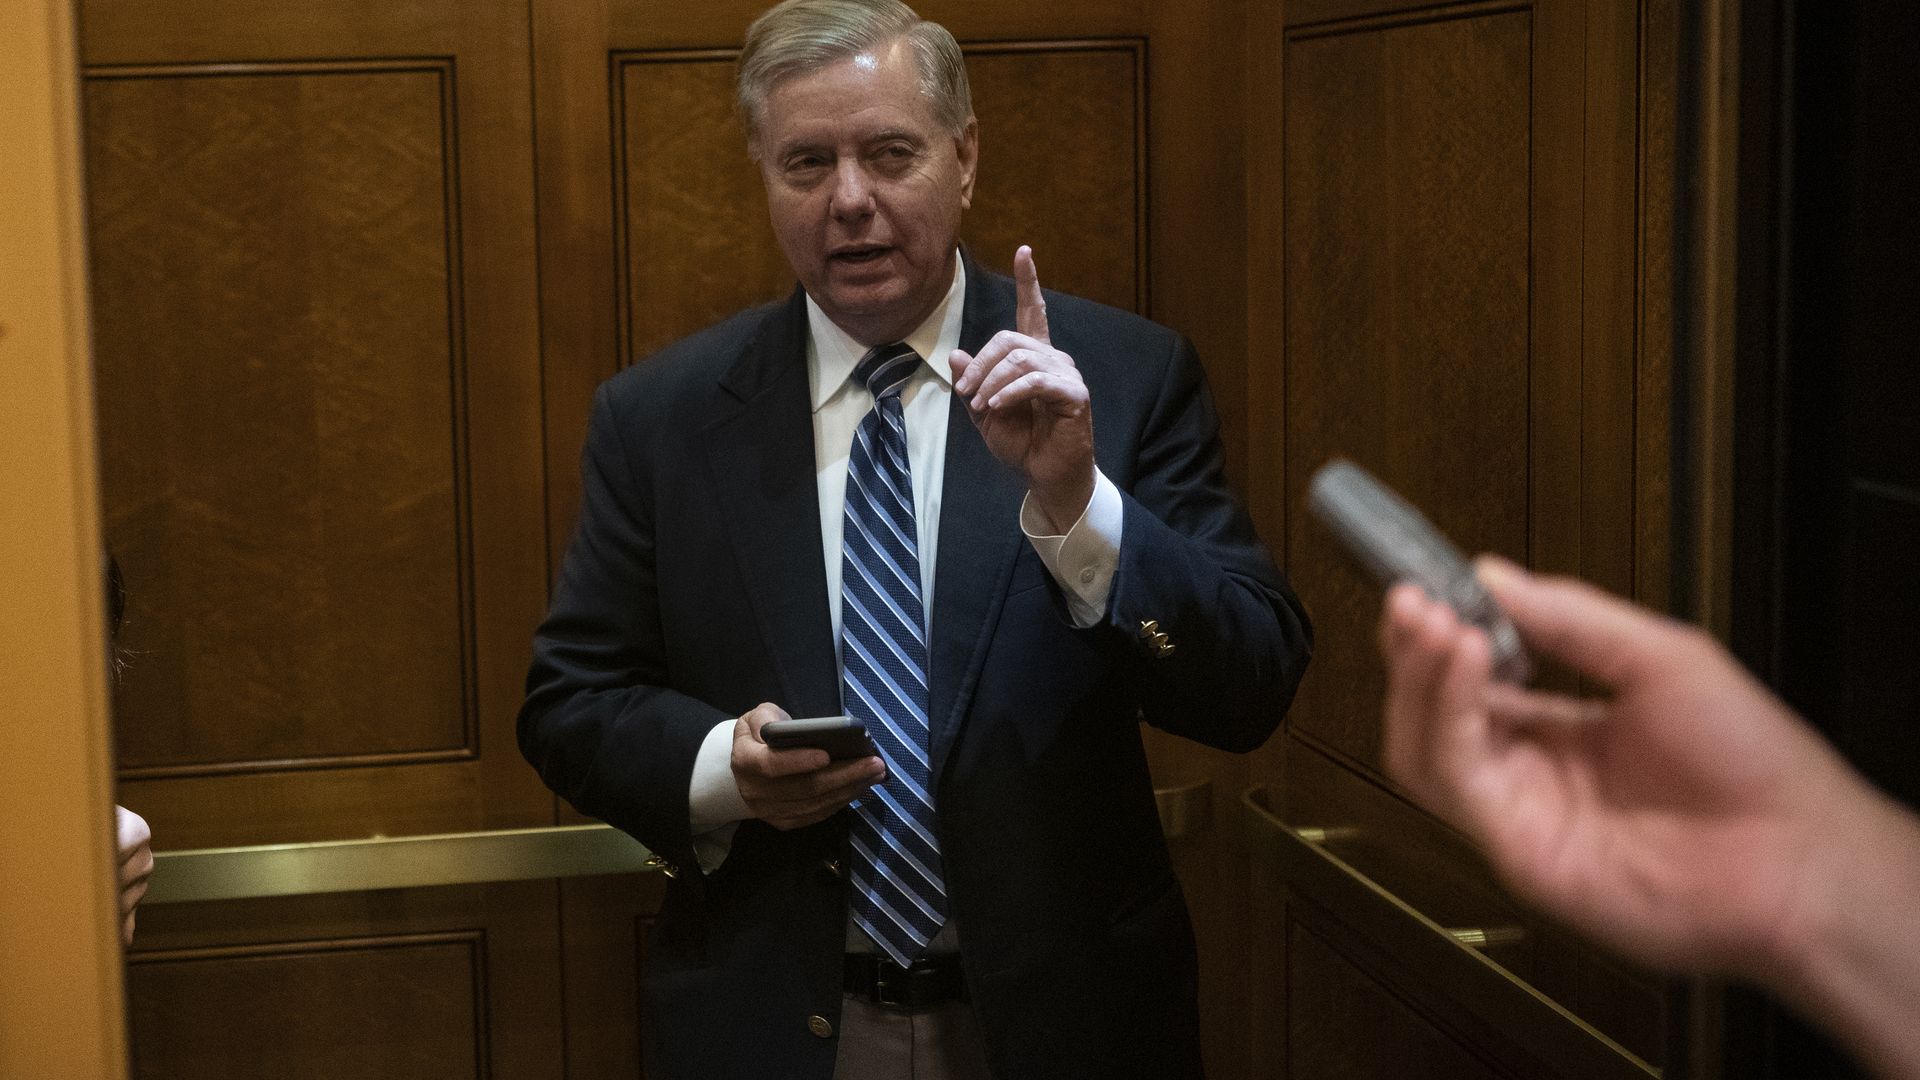 Photo of Sen. Lindsey Graham in an elevator with smartphone in one hand, and other hand's finger raised